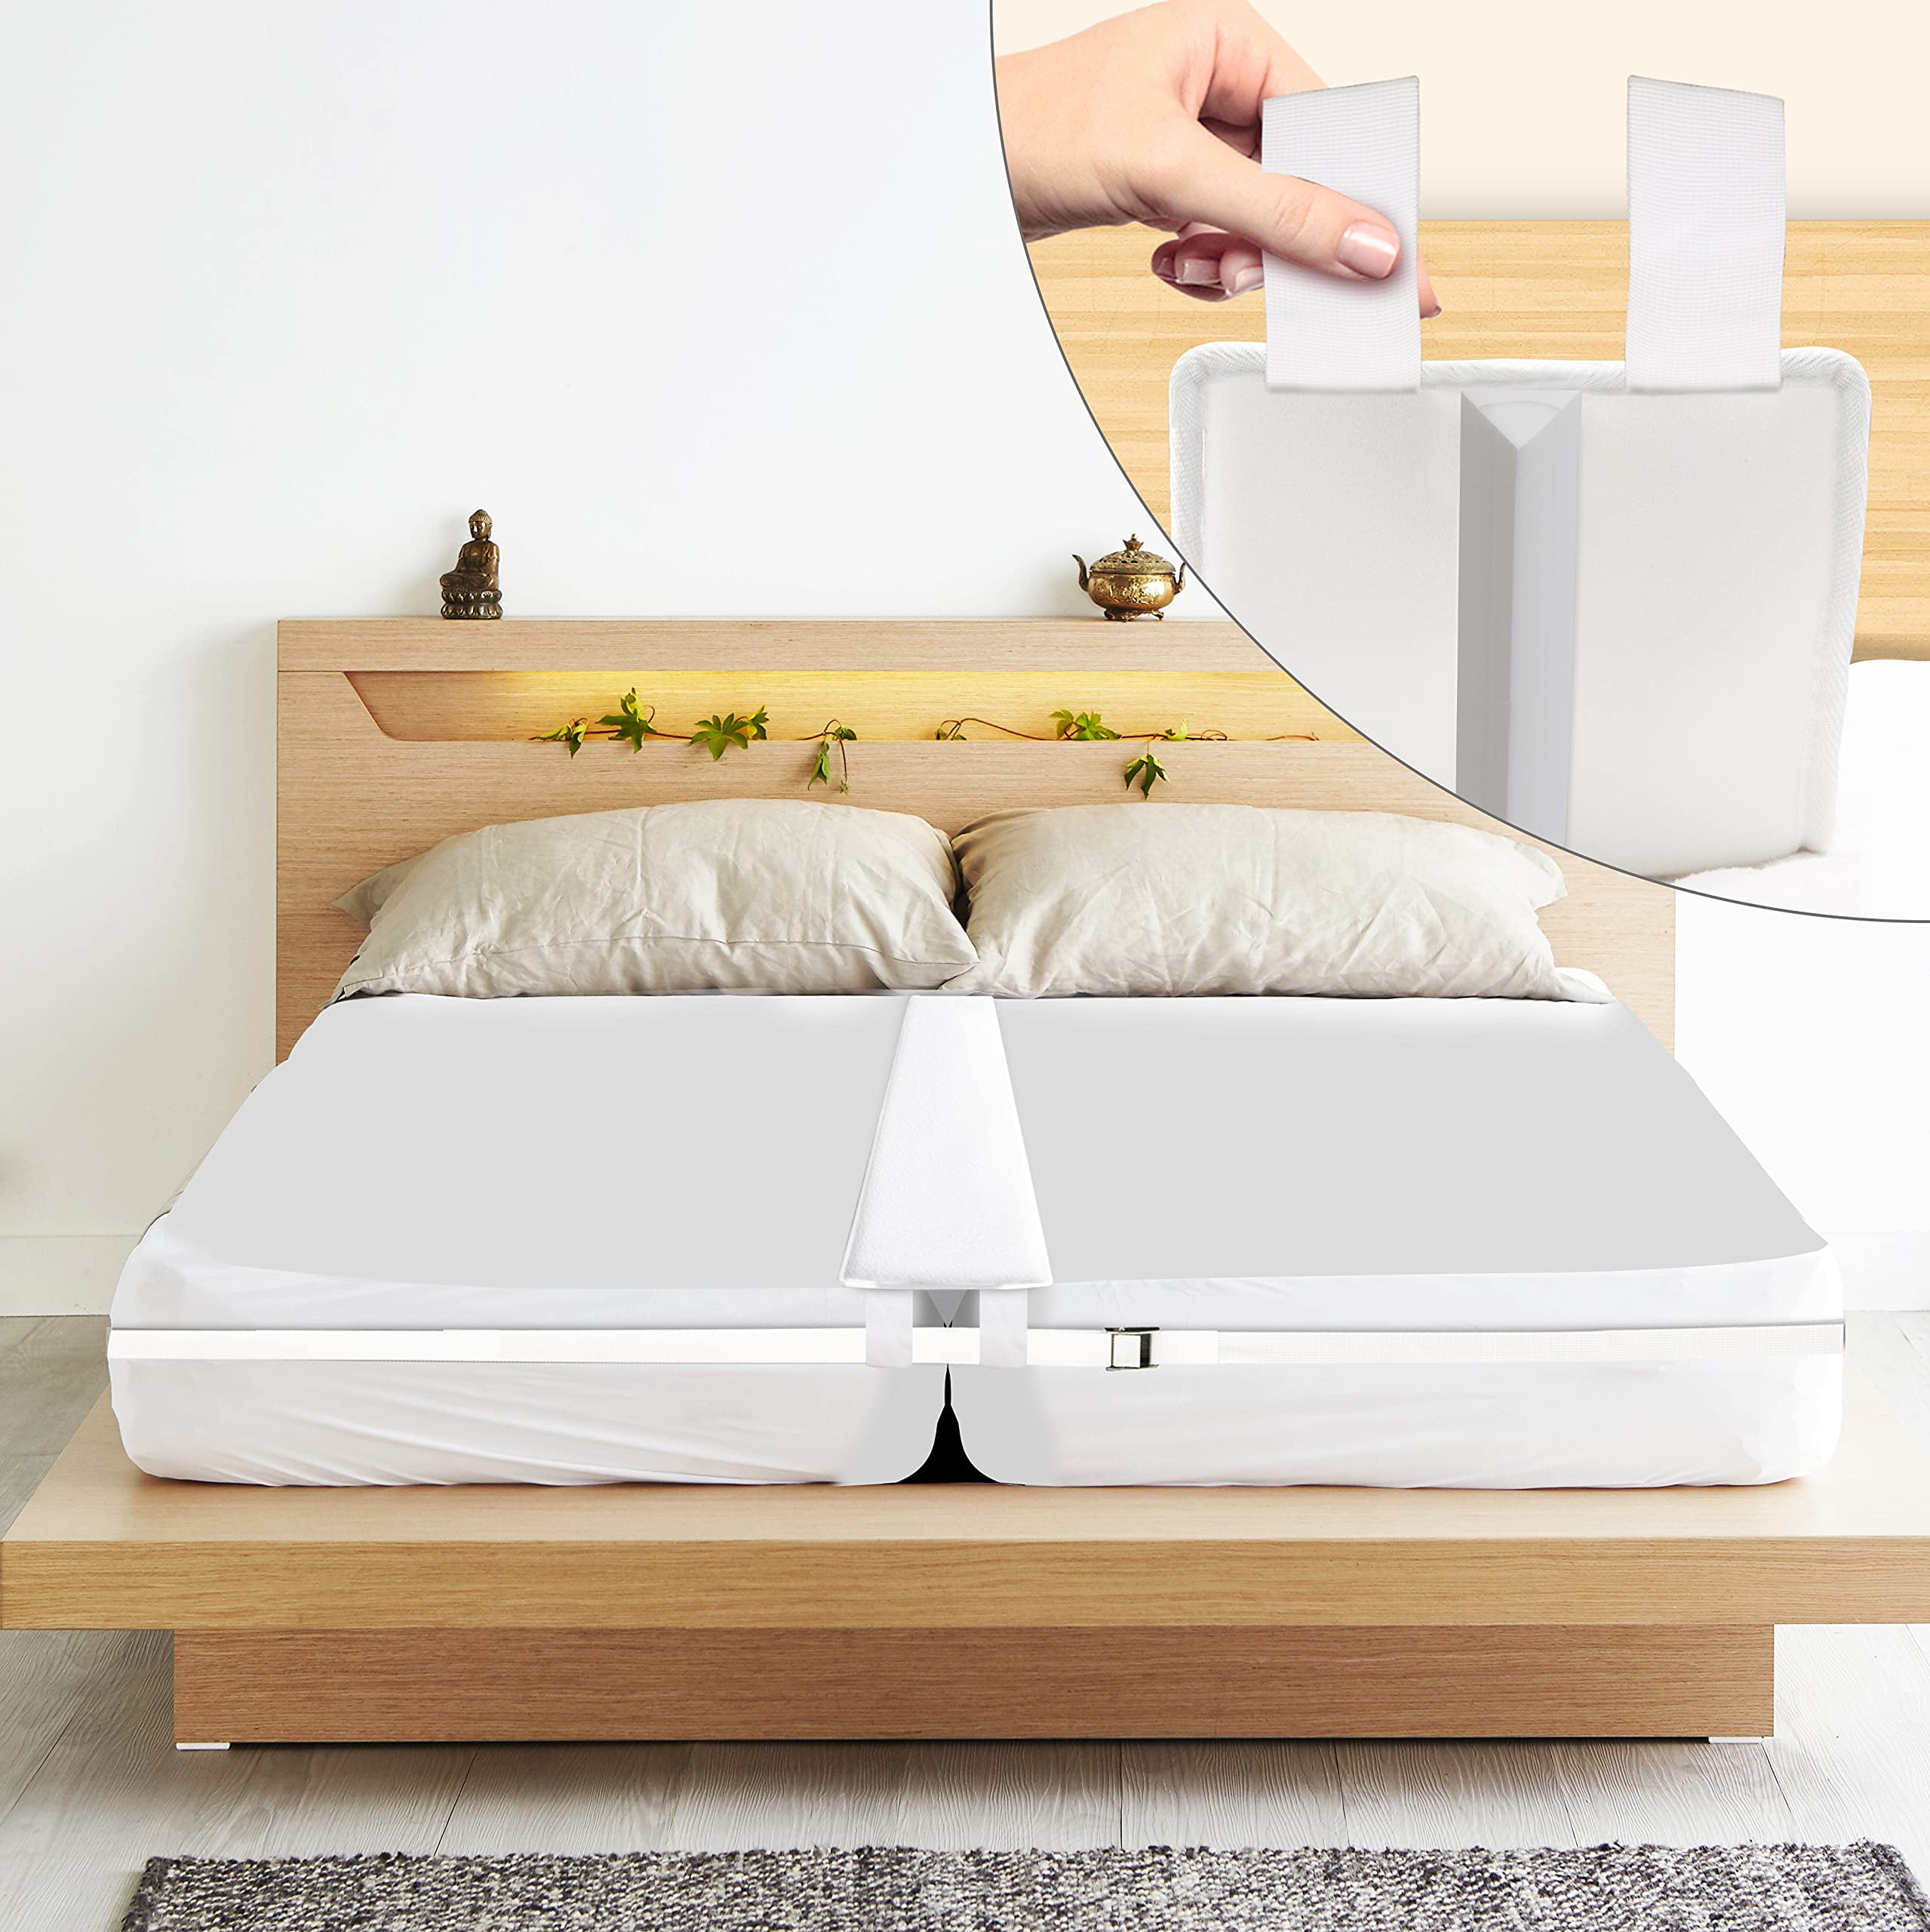 FeelAtHome 12 inch Wide Bed Bridge Twin to King Converter Kit - Twin Bed Connector King Maker - Bed Gap Filler to Make Twin Beds Into King - Mattress